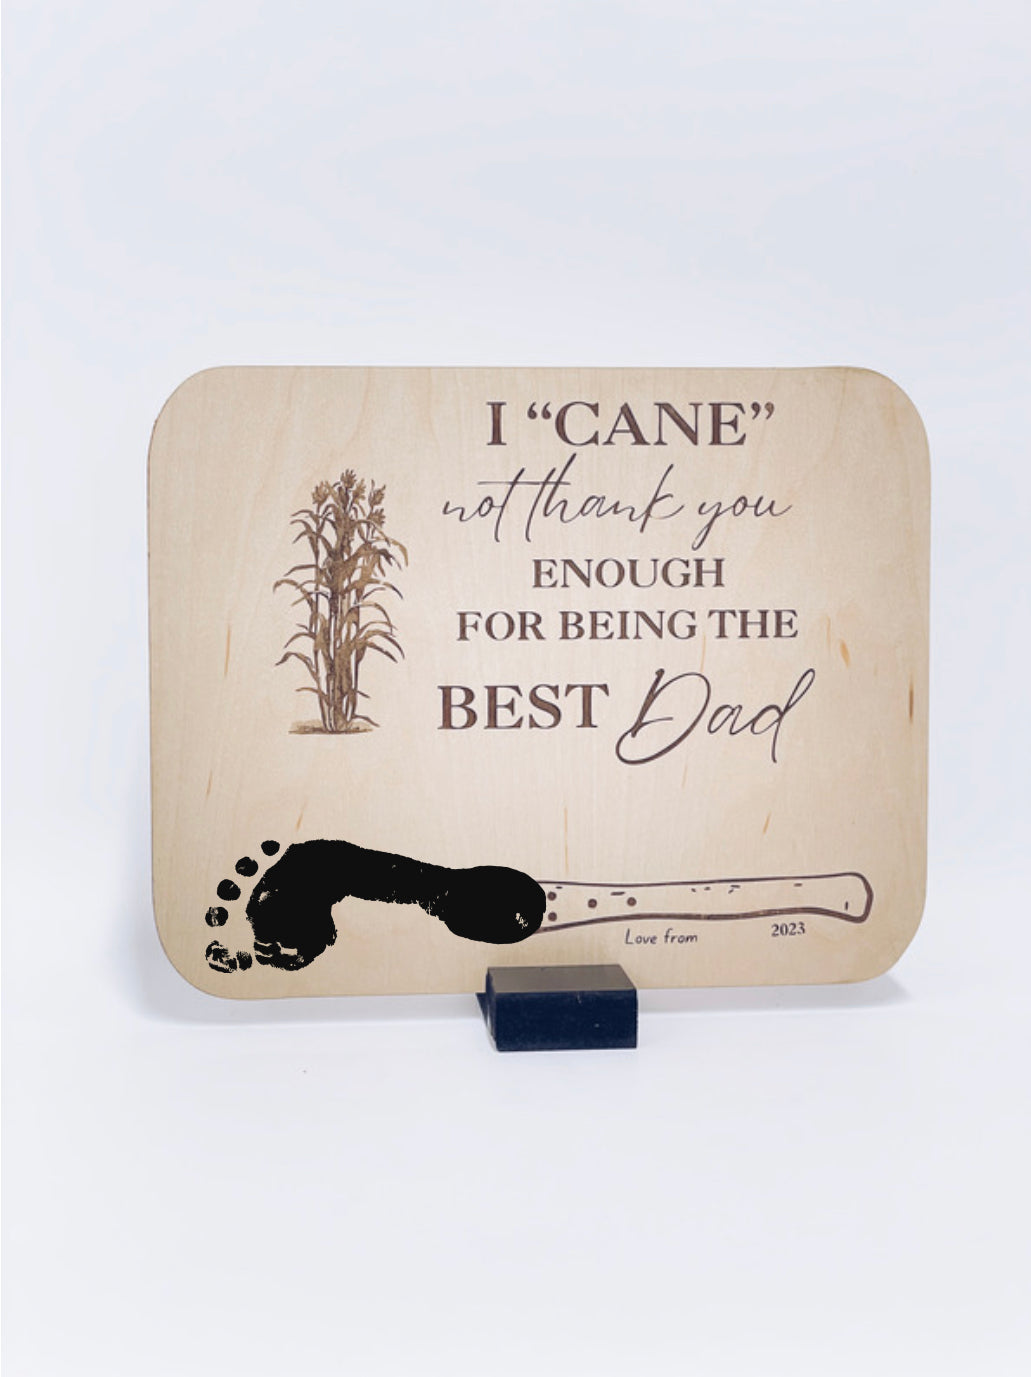 Father Day Plaques